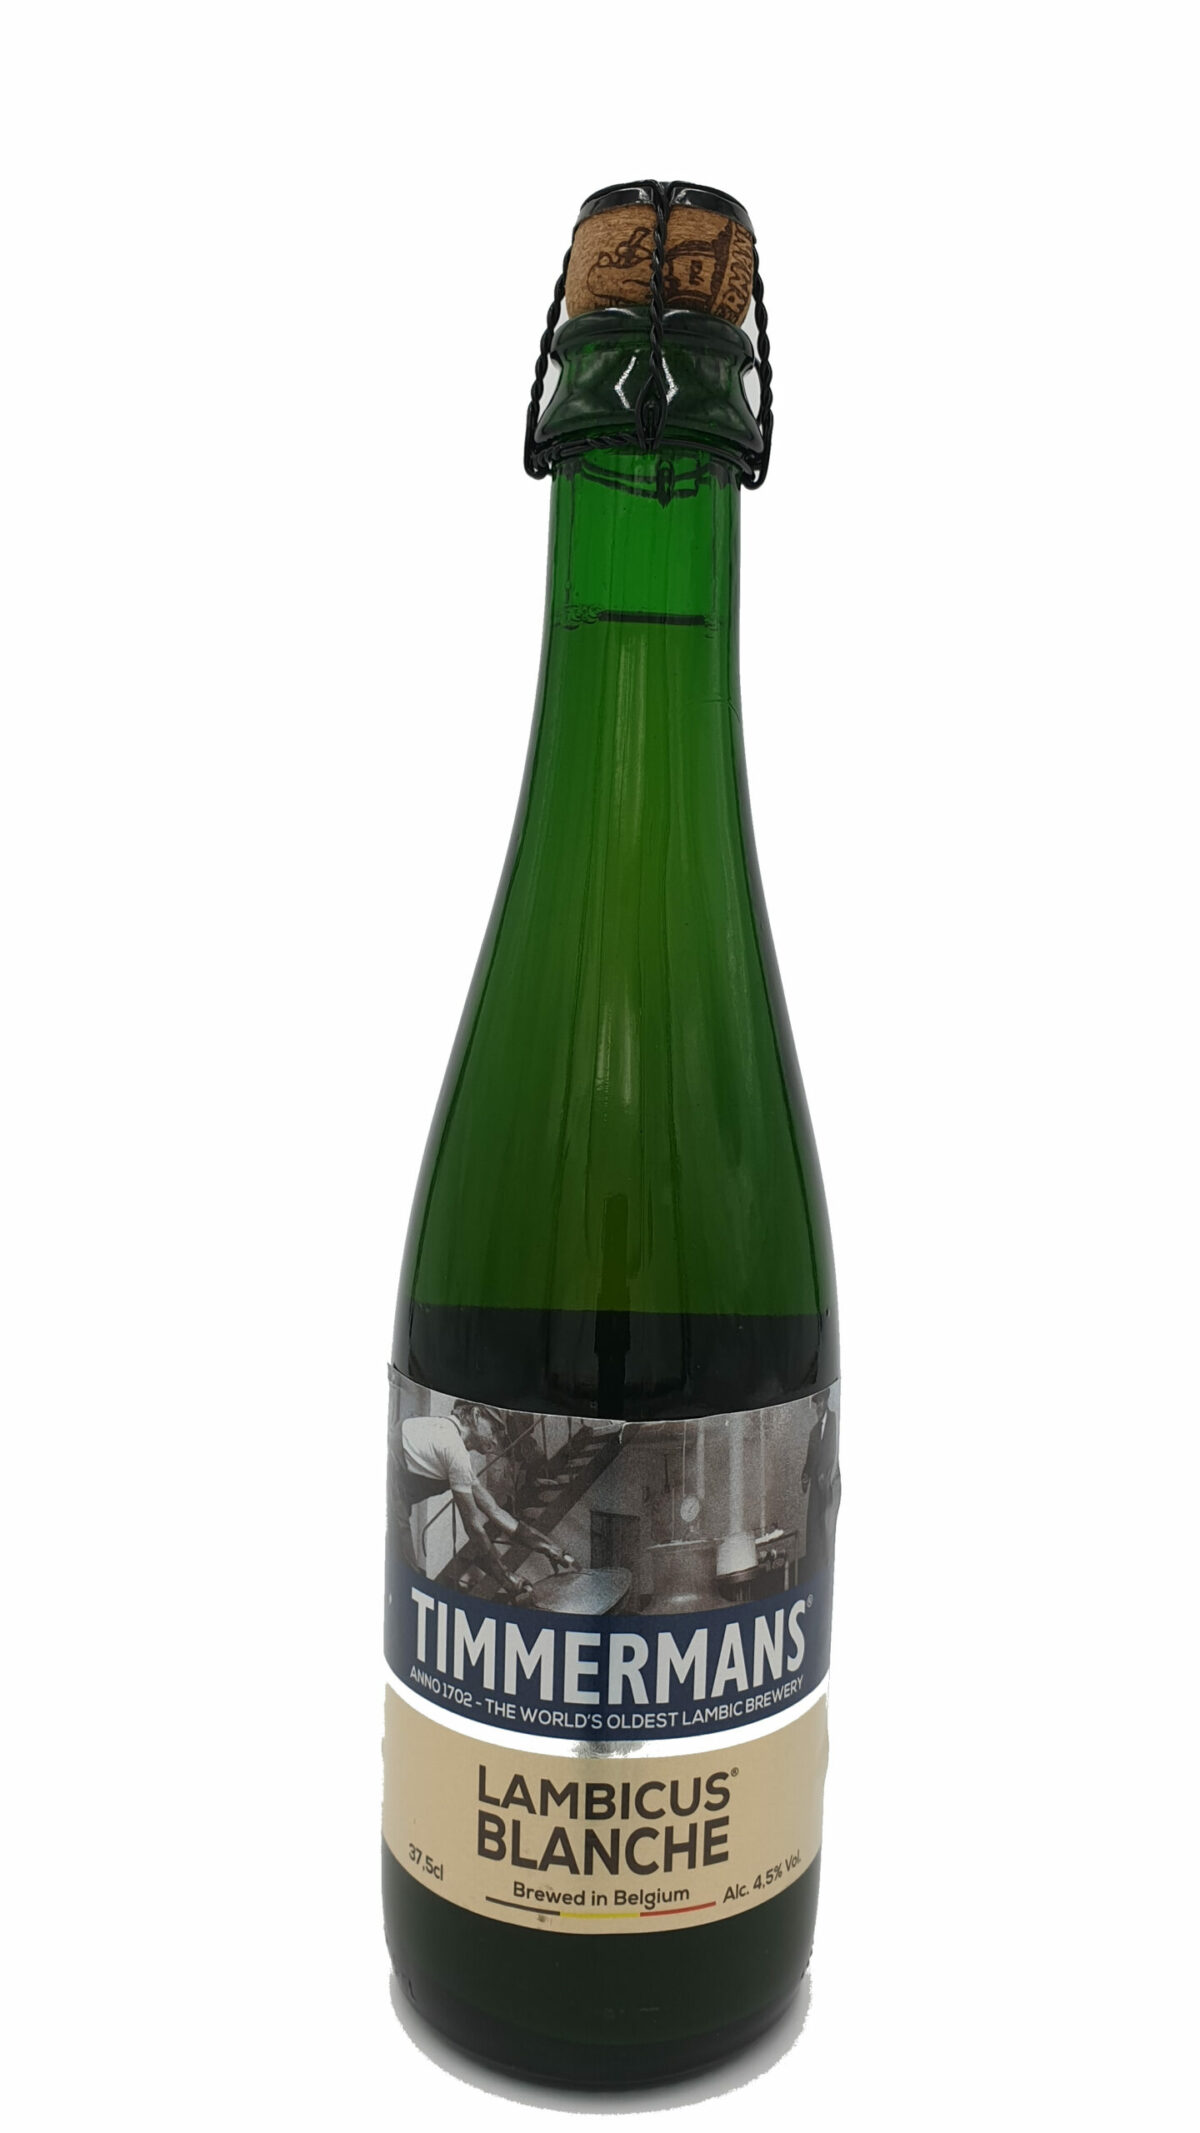 timmermans lambicus blanche